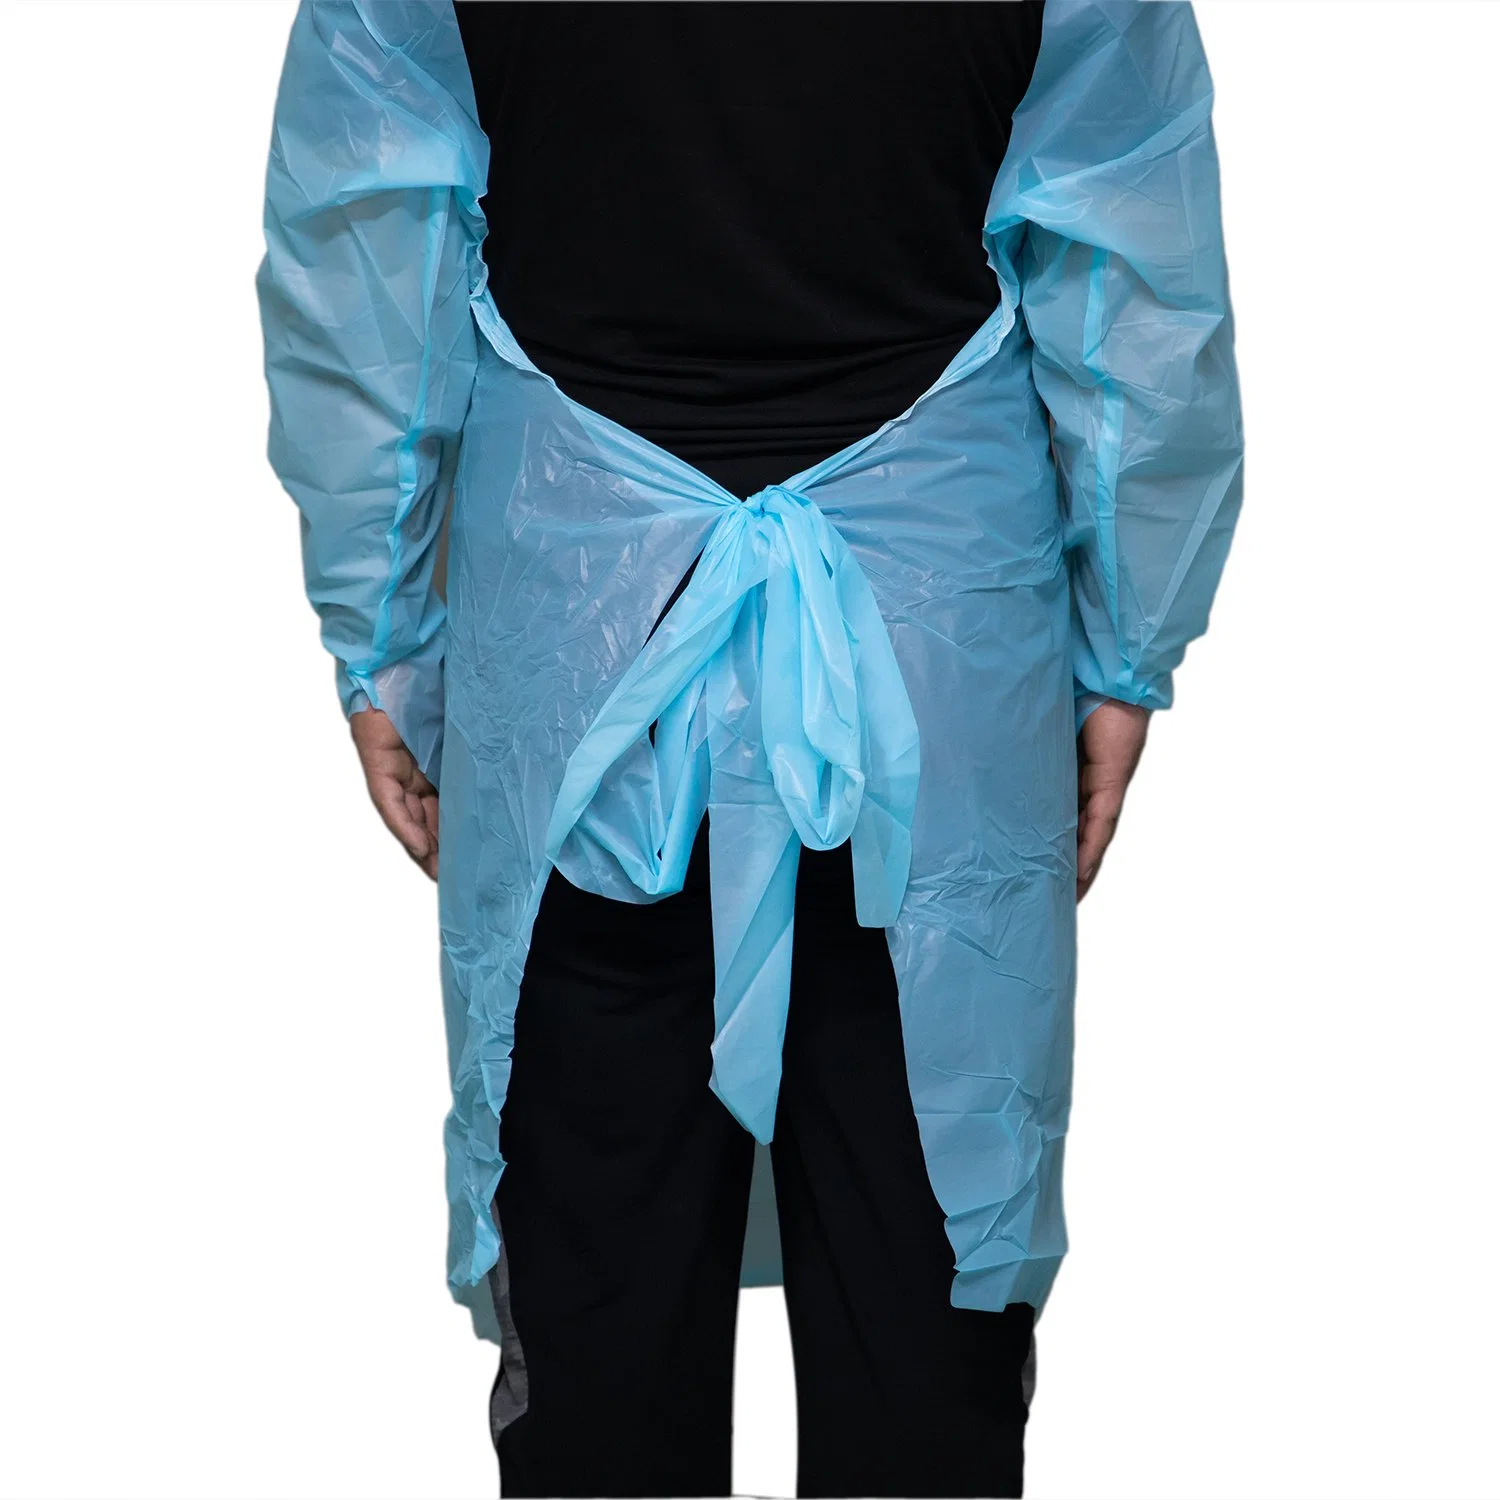 Medical Protective Gown, Visitor/Exam/Patient, Thumb Loop CPE Gown